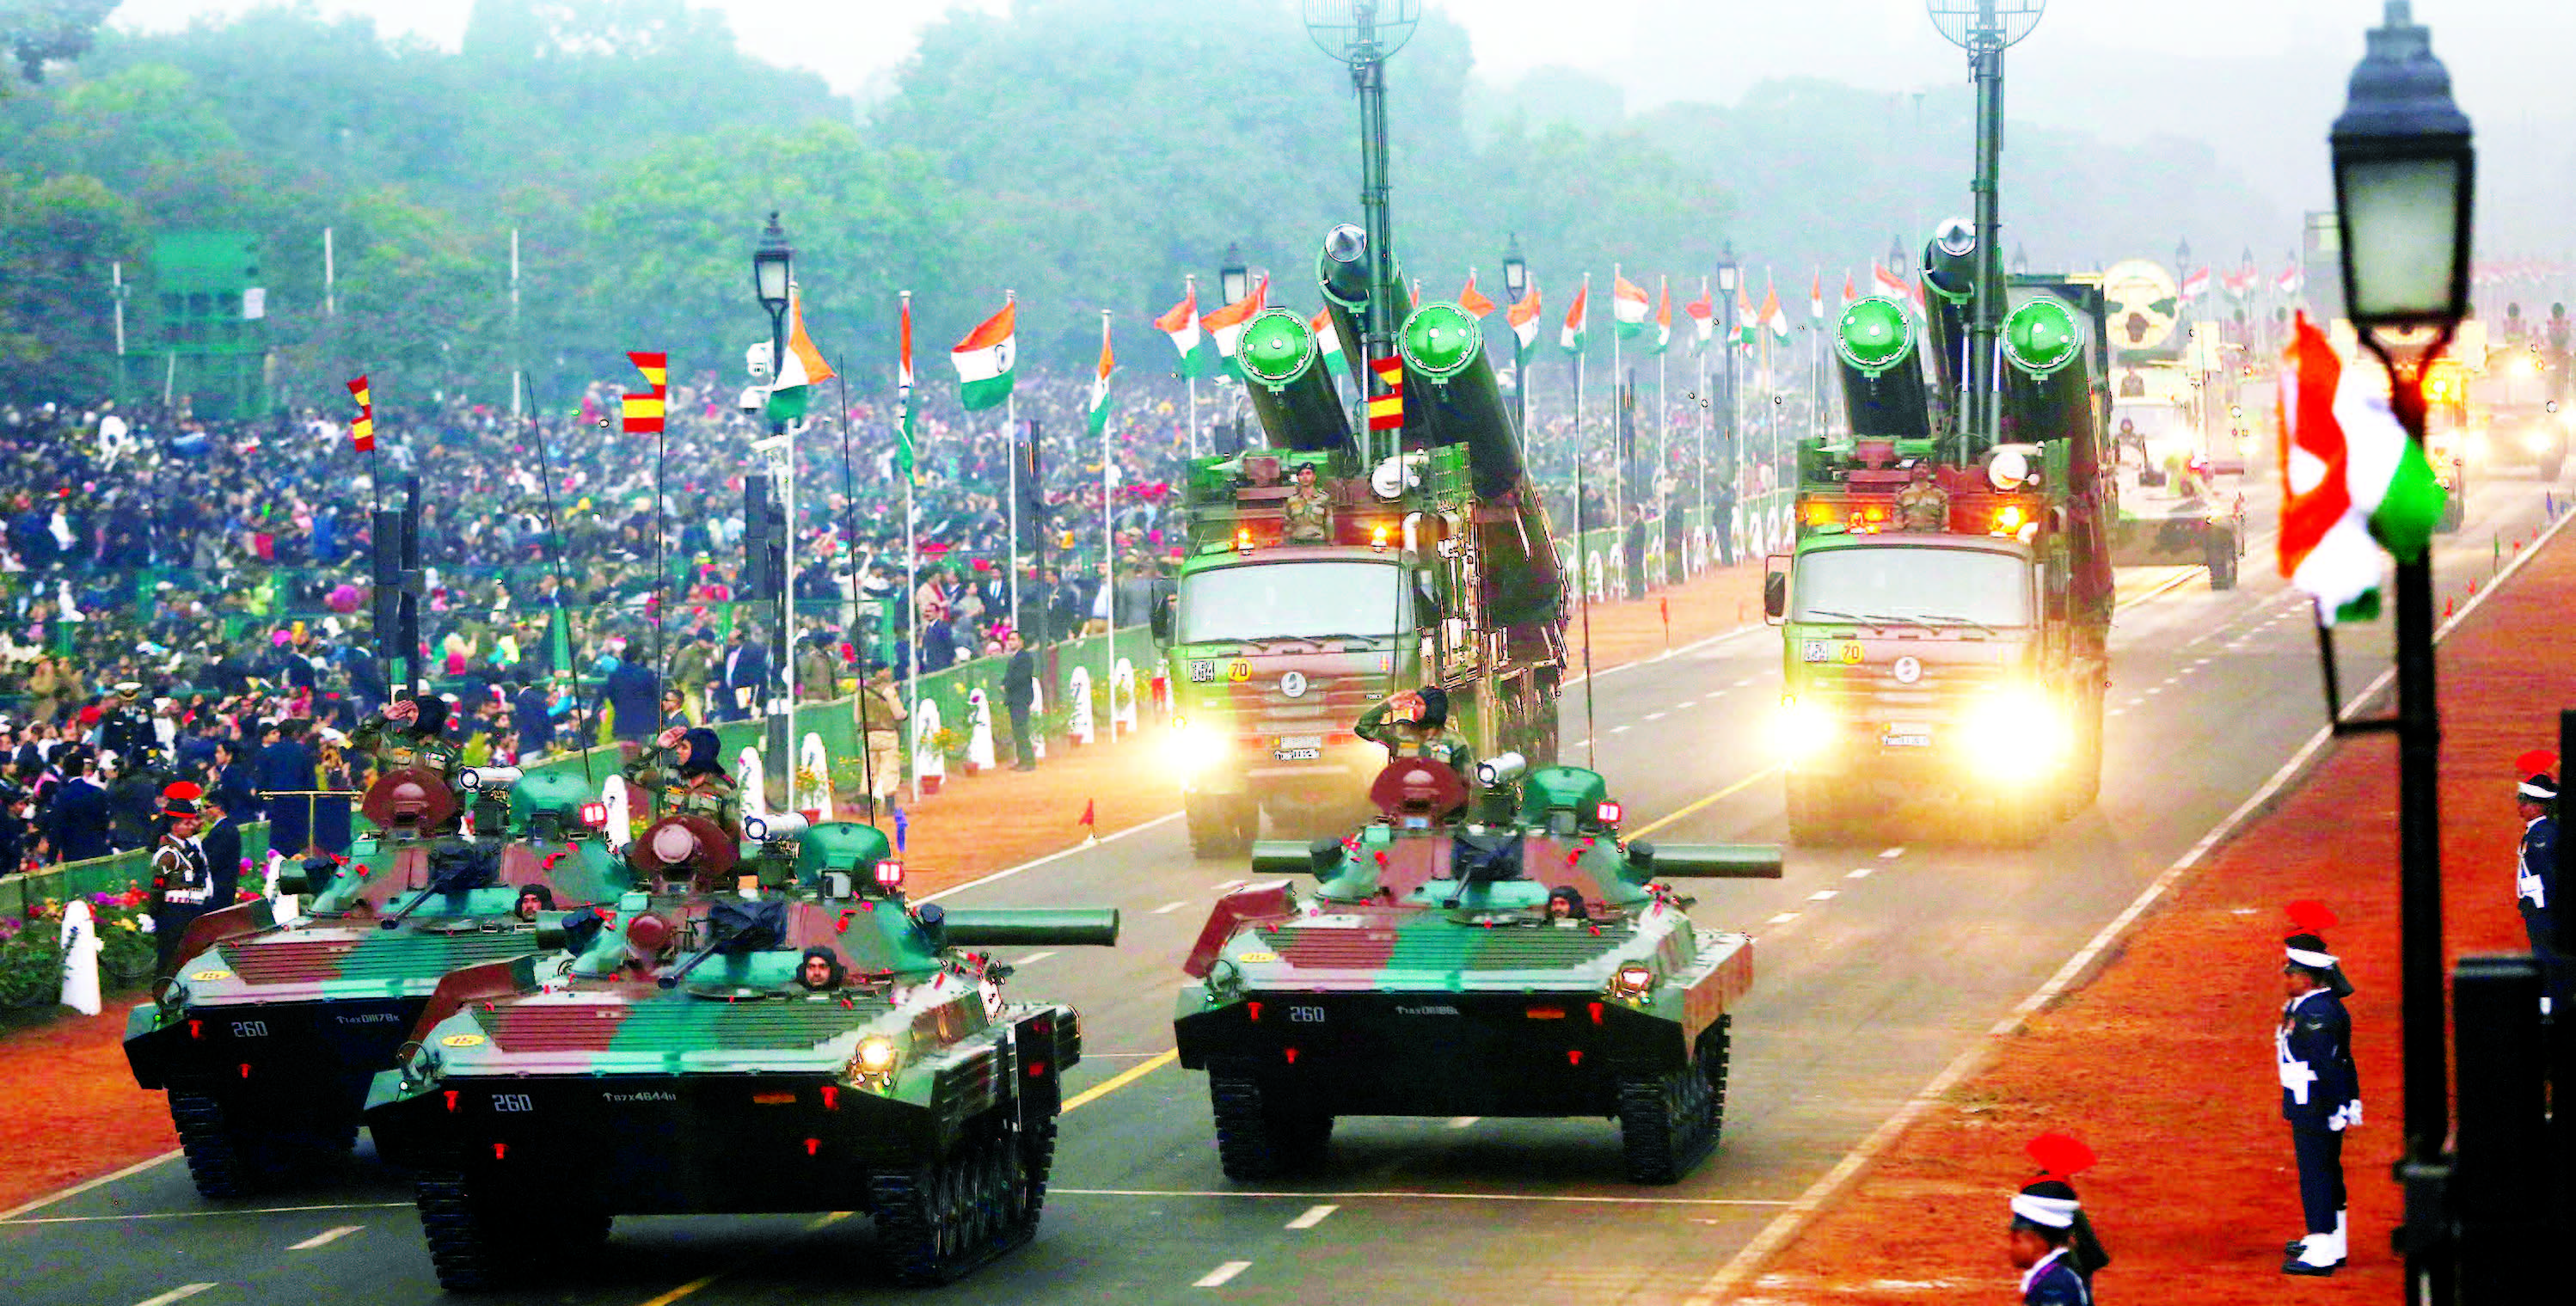 India presented a scintillating display of her military might at the 68th Republic Day at Rajpath, New Delhi, January 26, 2017